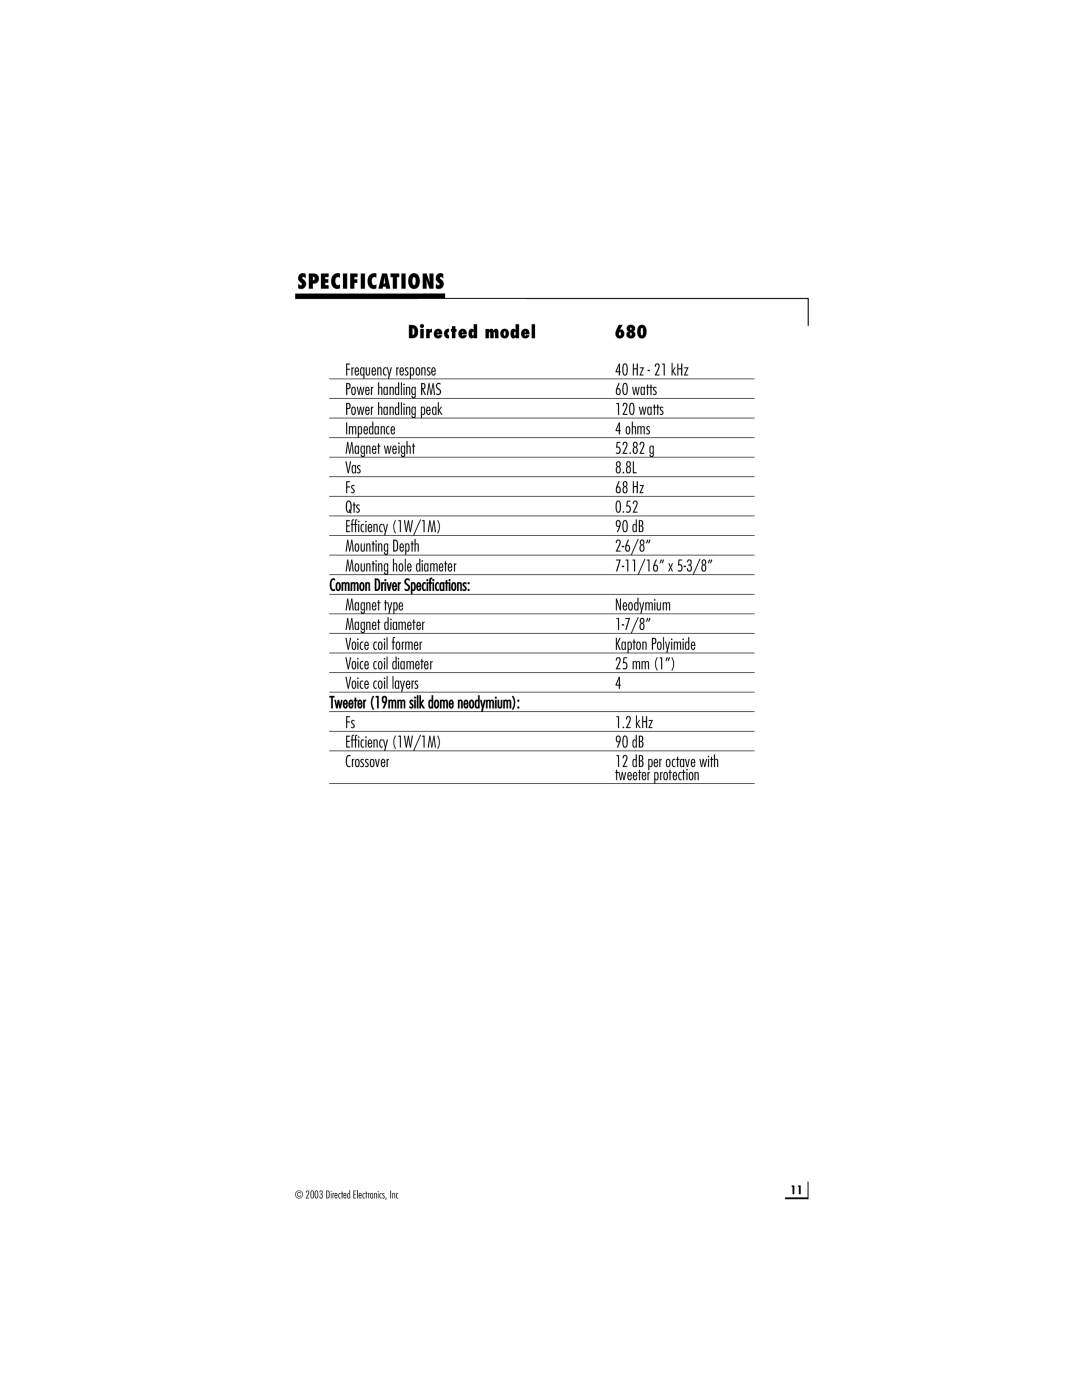 Directed Electronics s680 manual Specifications, Directed model 680 